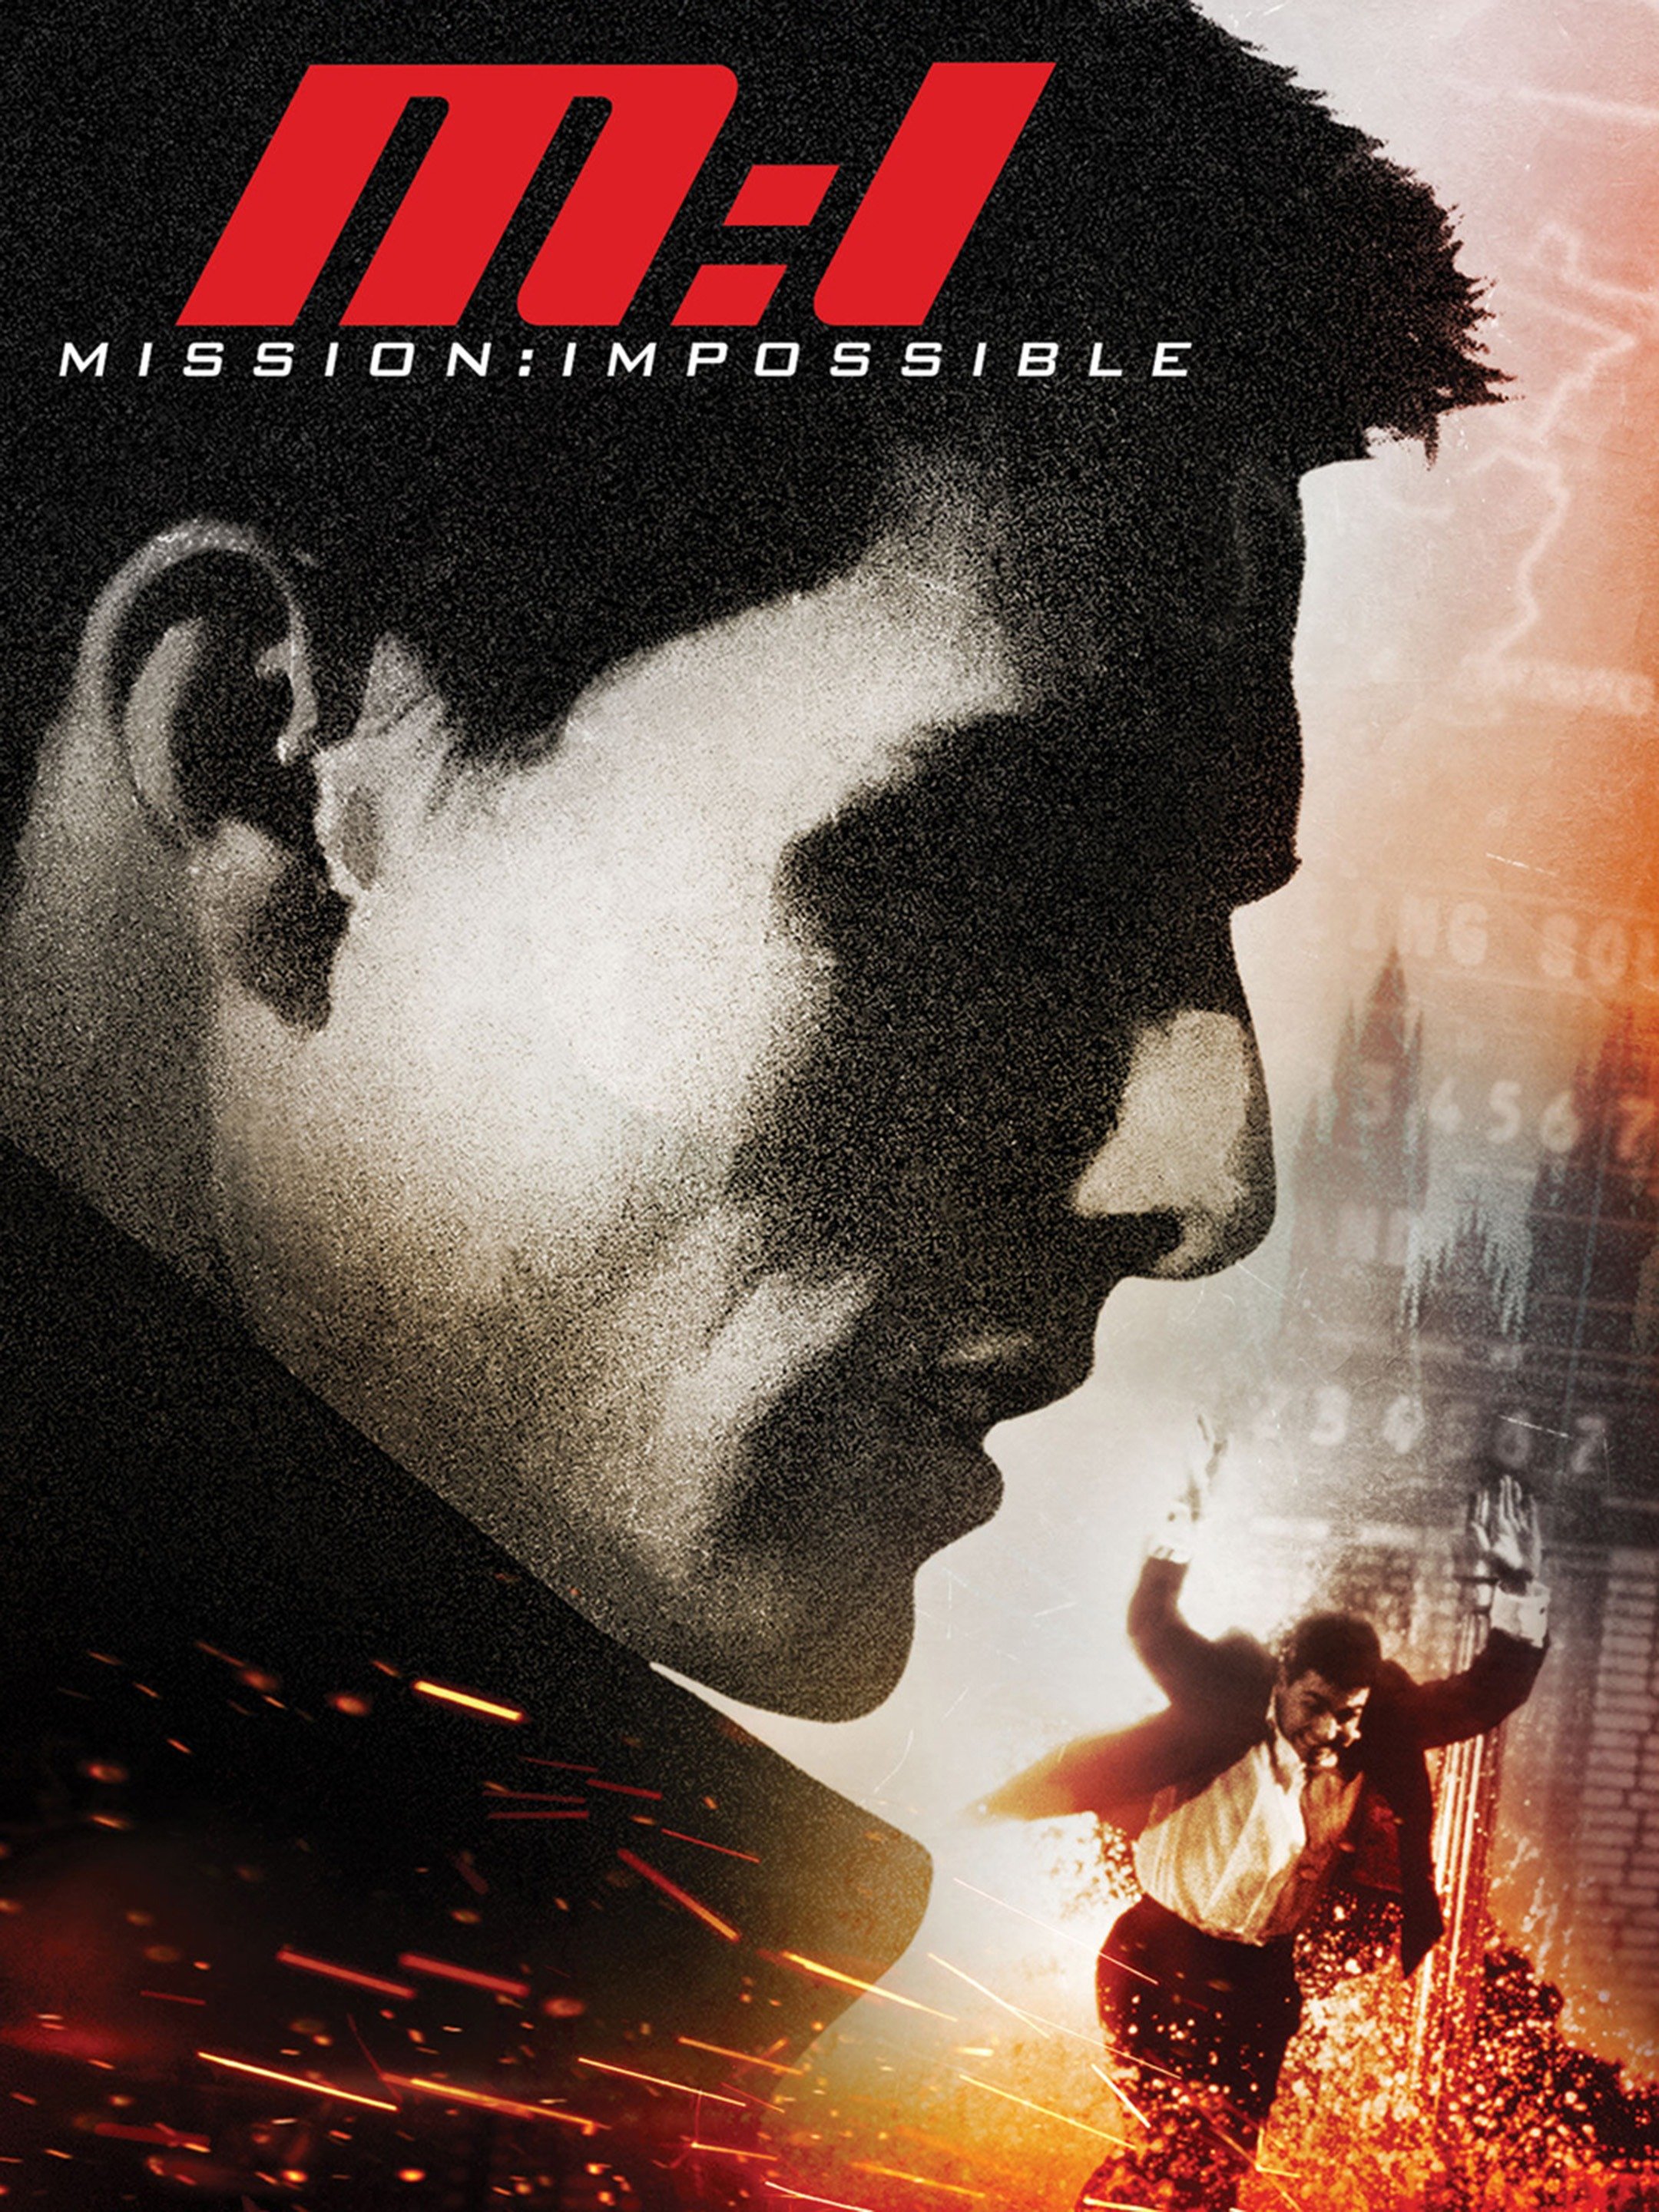 watch mission impossible 5 free